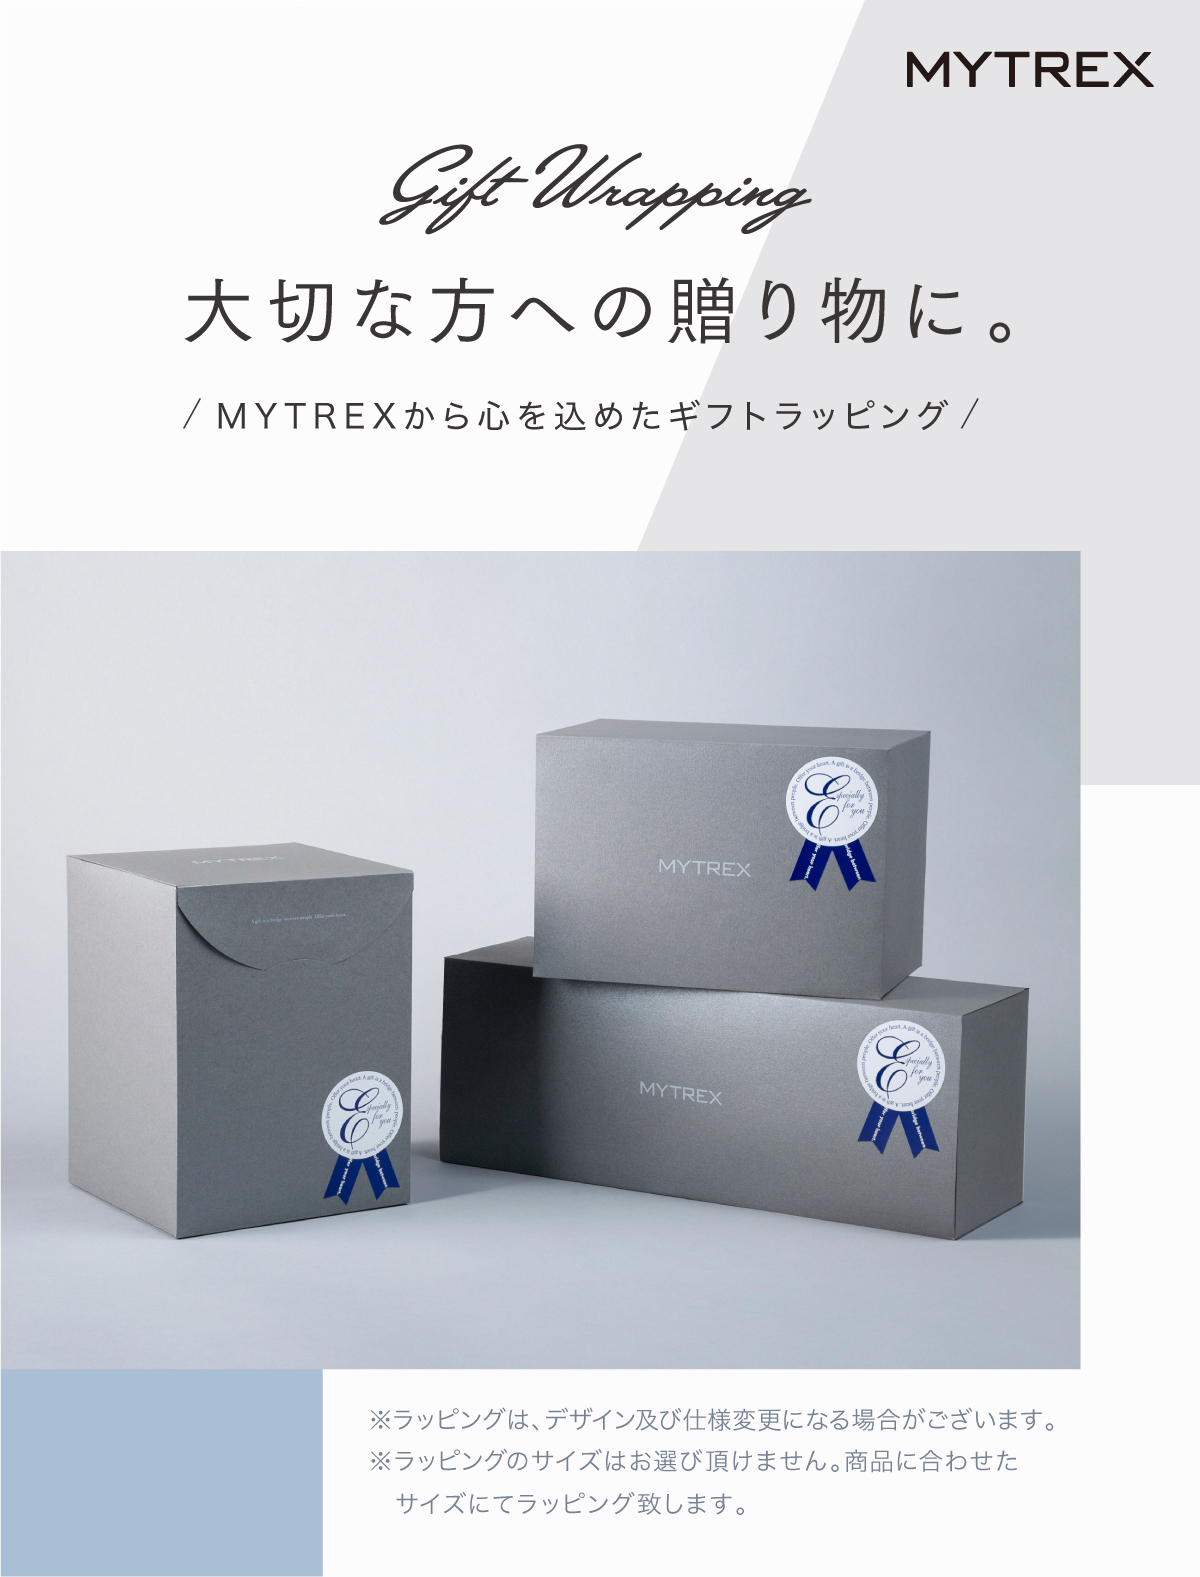 Gift Wrapping – MYTREX専用ギフトラッピング（ボックス） — MYTREX 